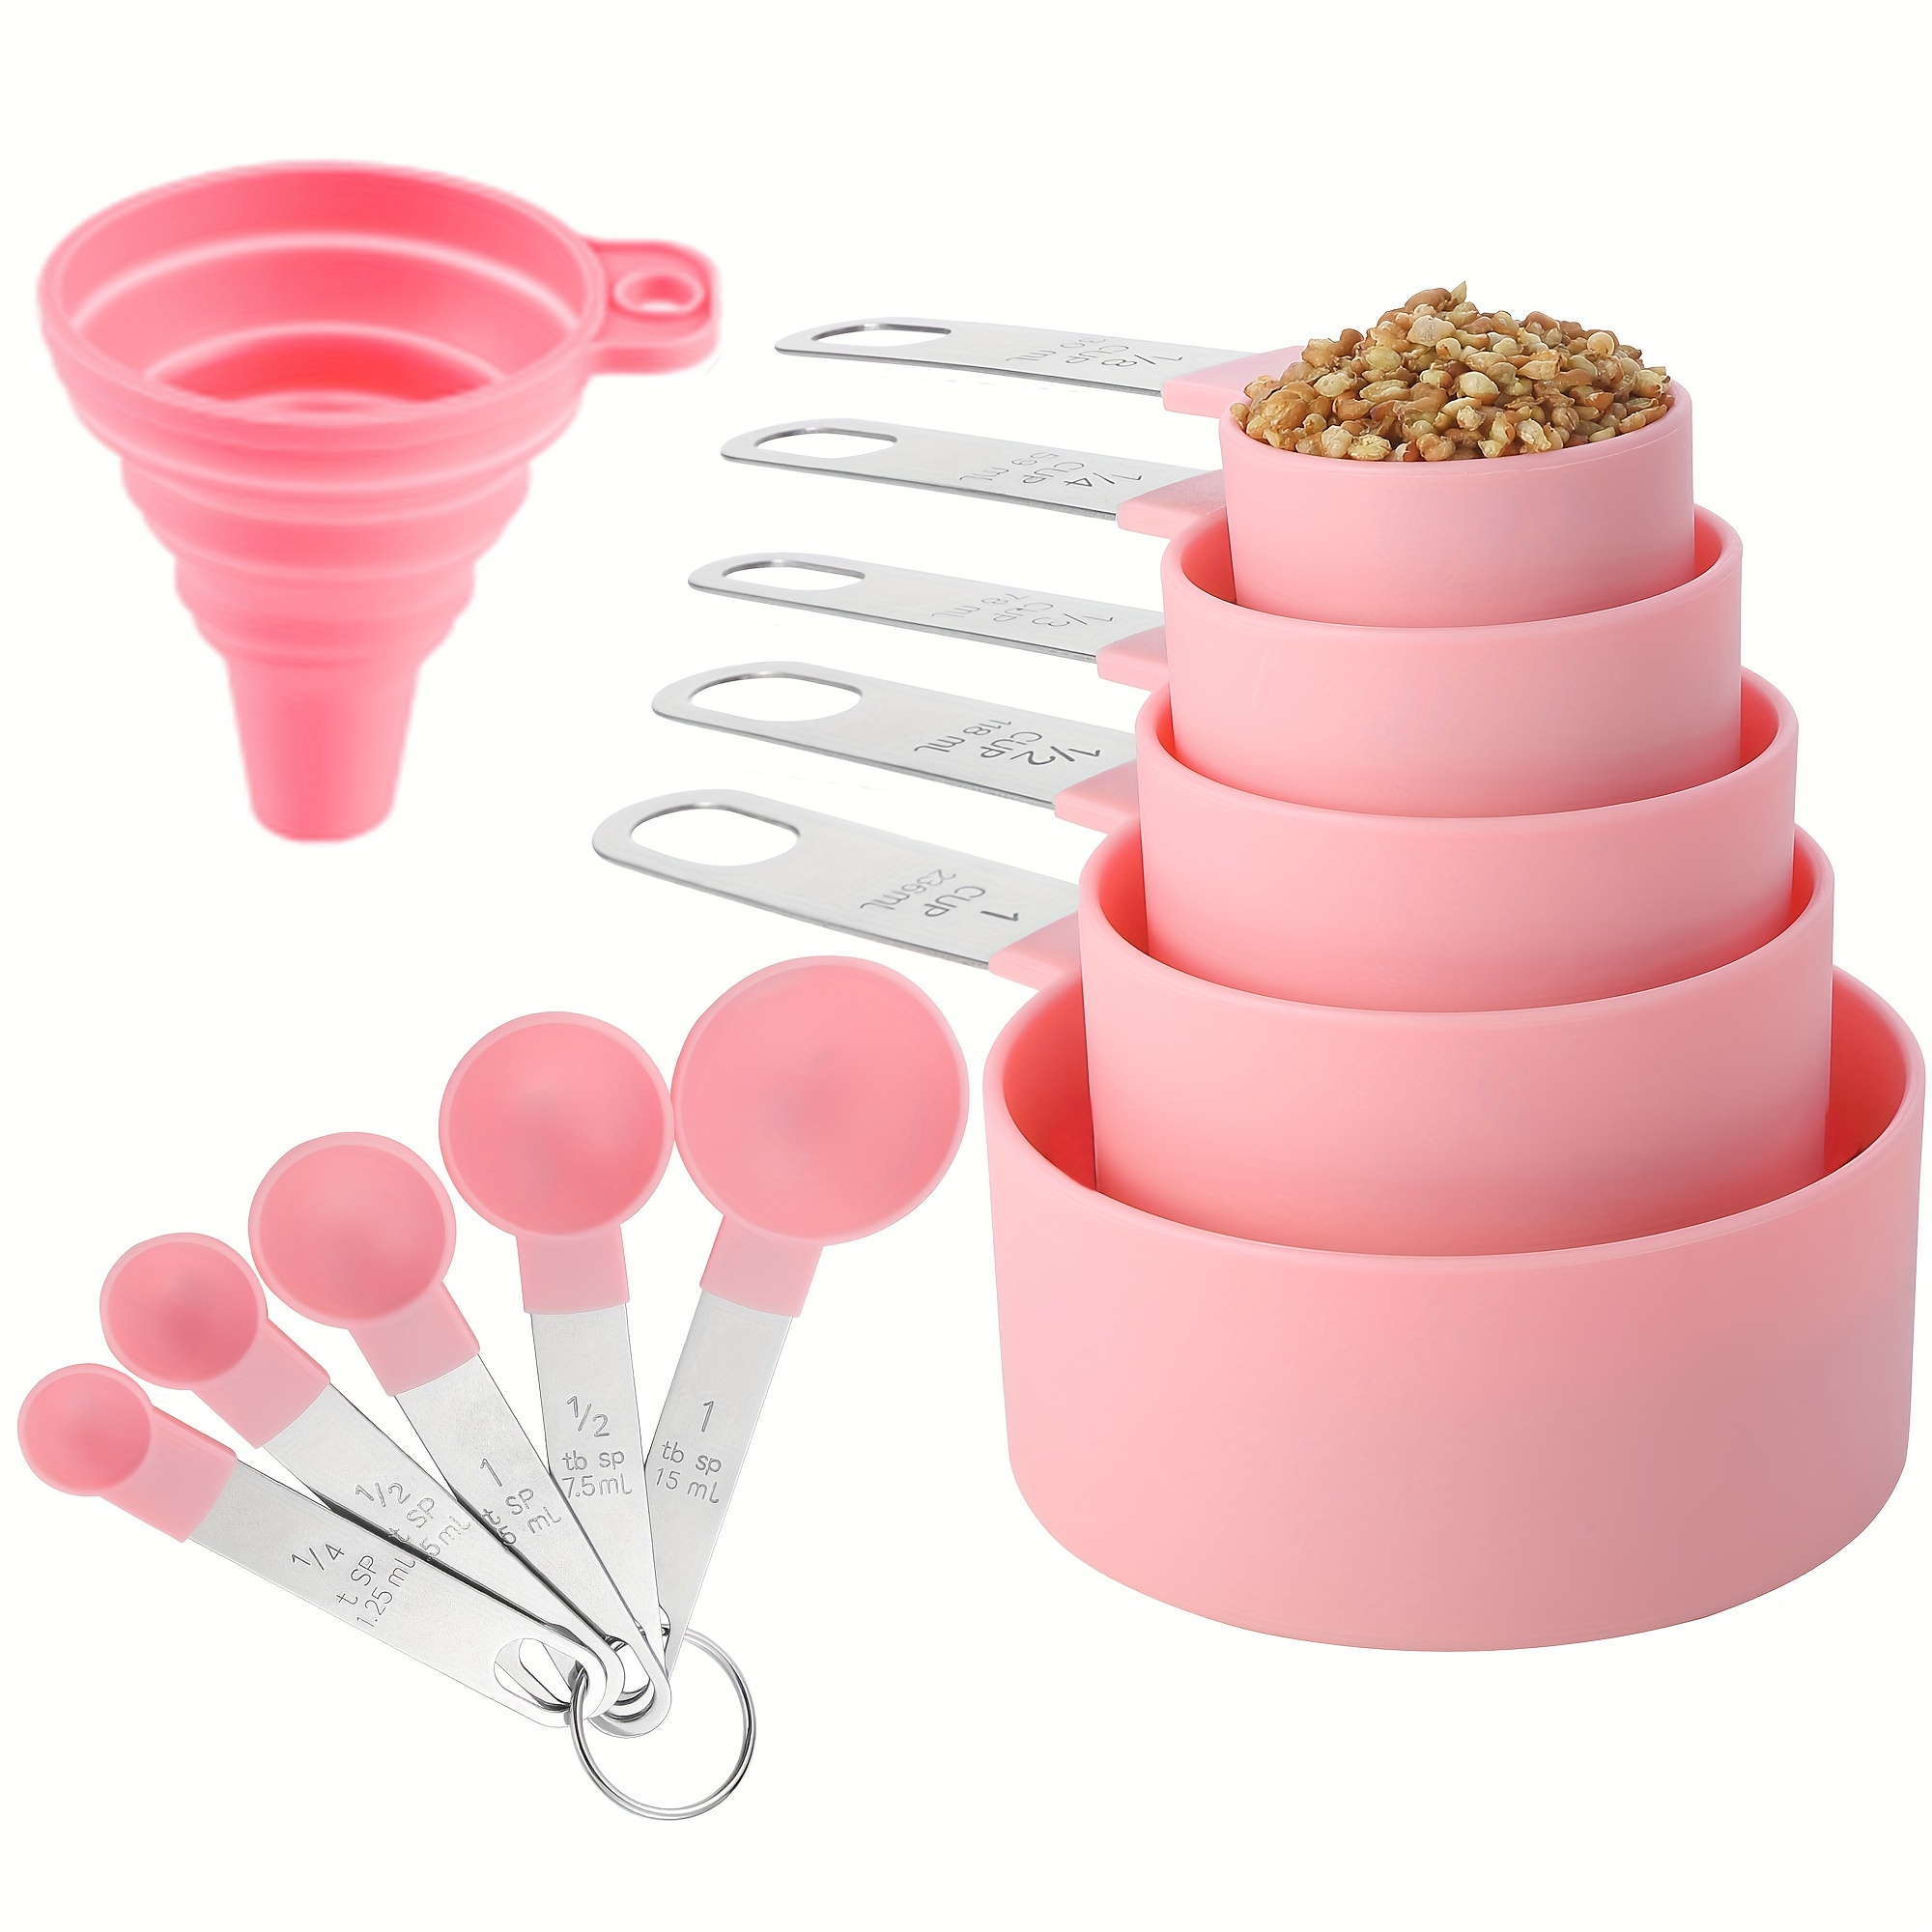 Pink Measuring Cups and Spoons Set - Sturdy 8PC Pink & Gold